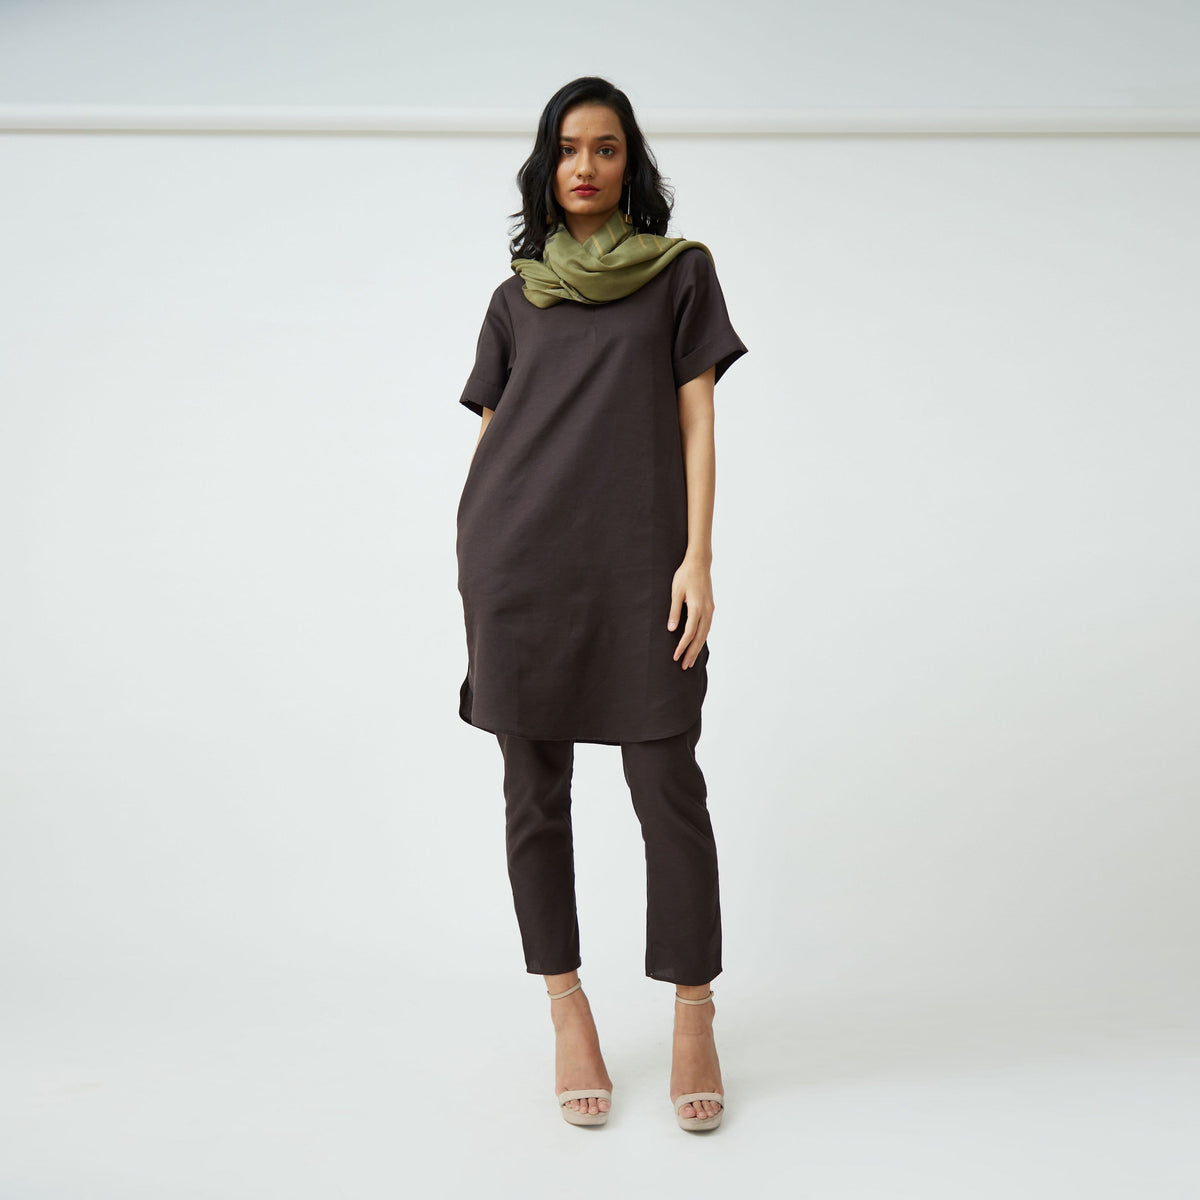 Saltpetre womens wear, indo-western pants and long tunic for semi formal, casual, occassional wear. Comfortably pencil-shaped ankle-length leg pants in coffee brown colour. Ankle length, back elastic and side pockets.